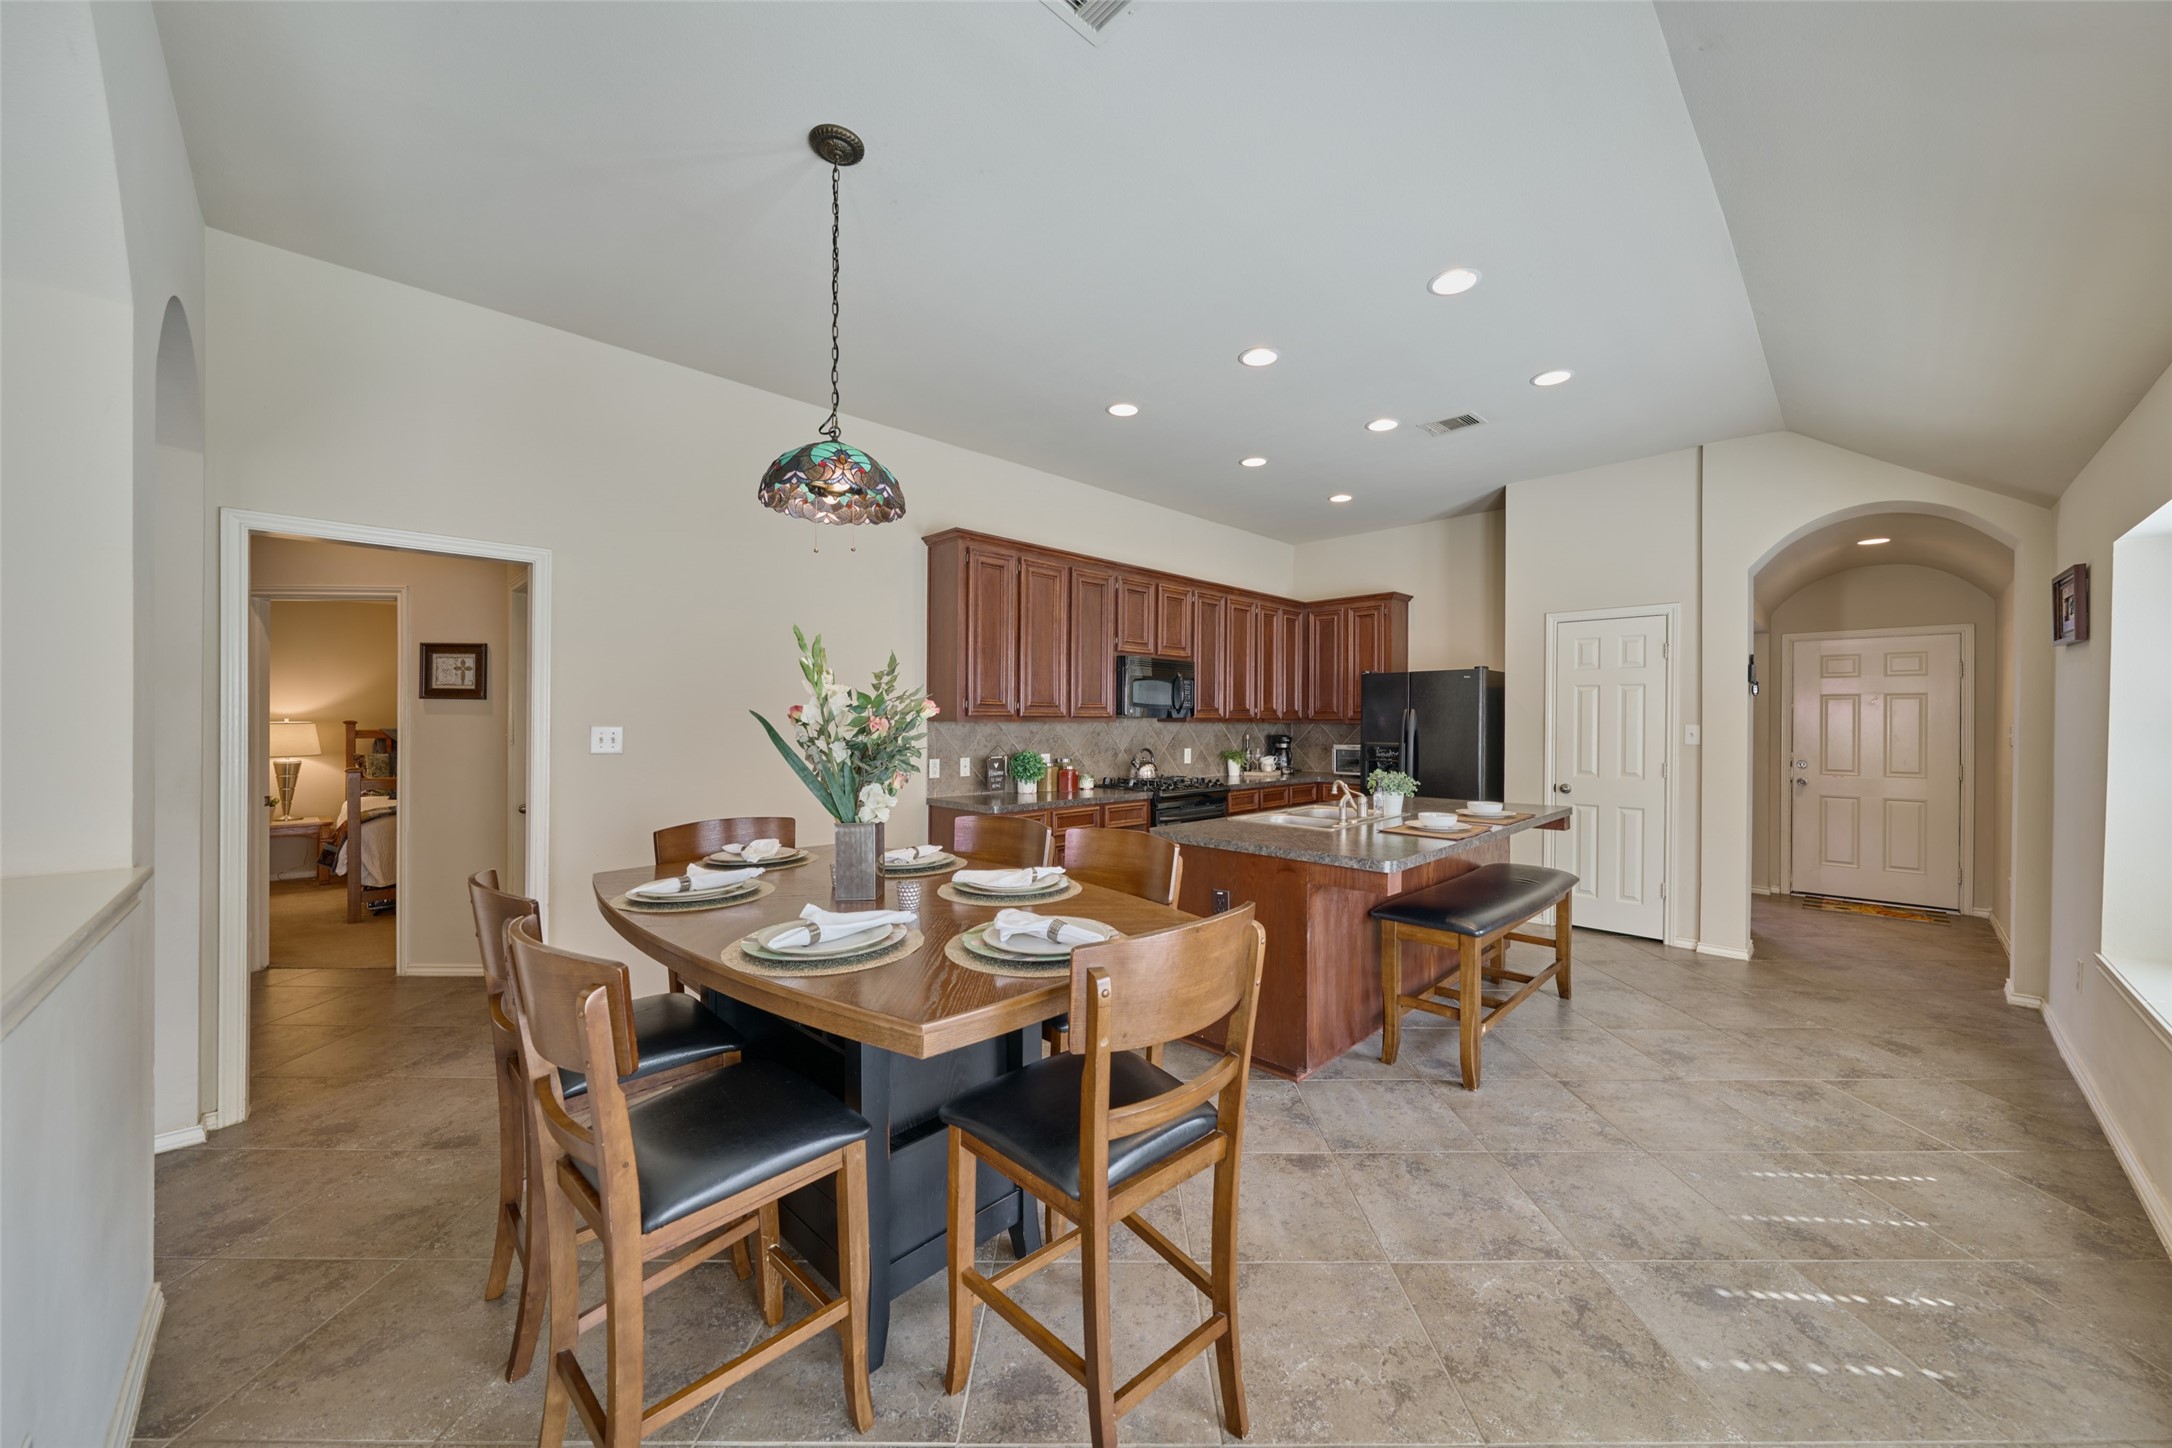 Great layout for breakfast and kitchen areas. Hall to left leads to the two secondary bedrooms, full bath and utility room.